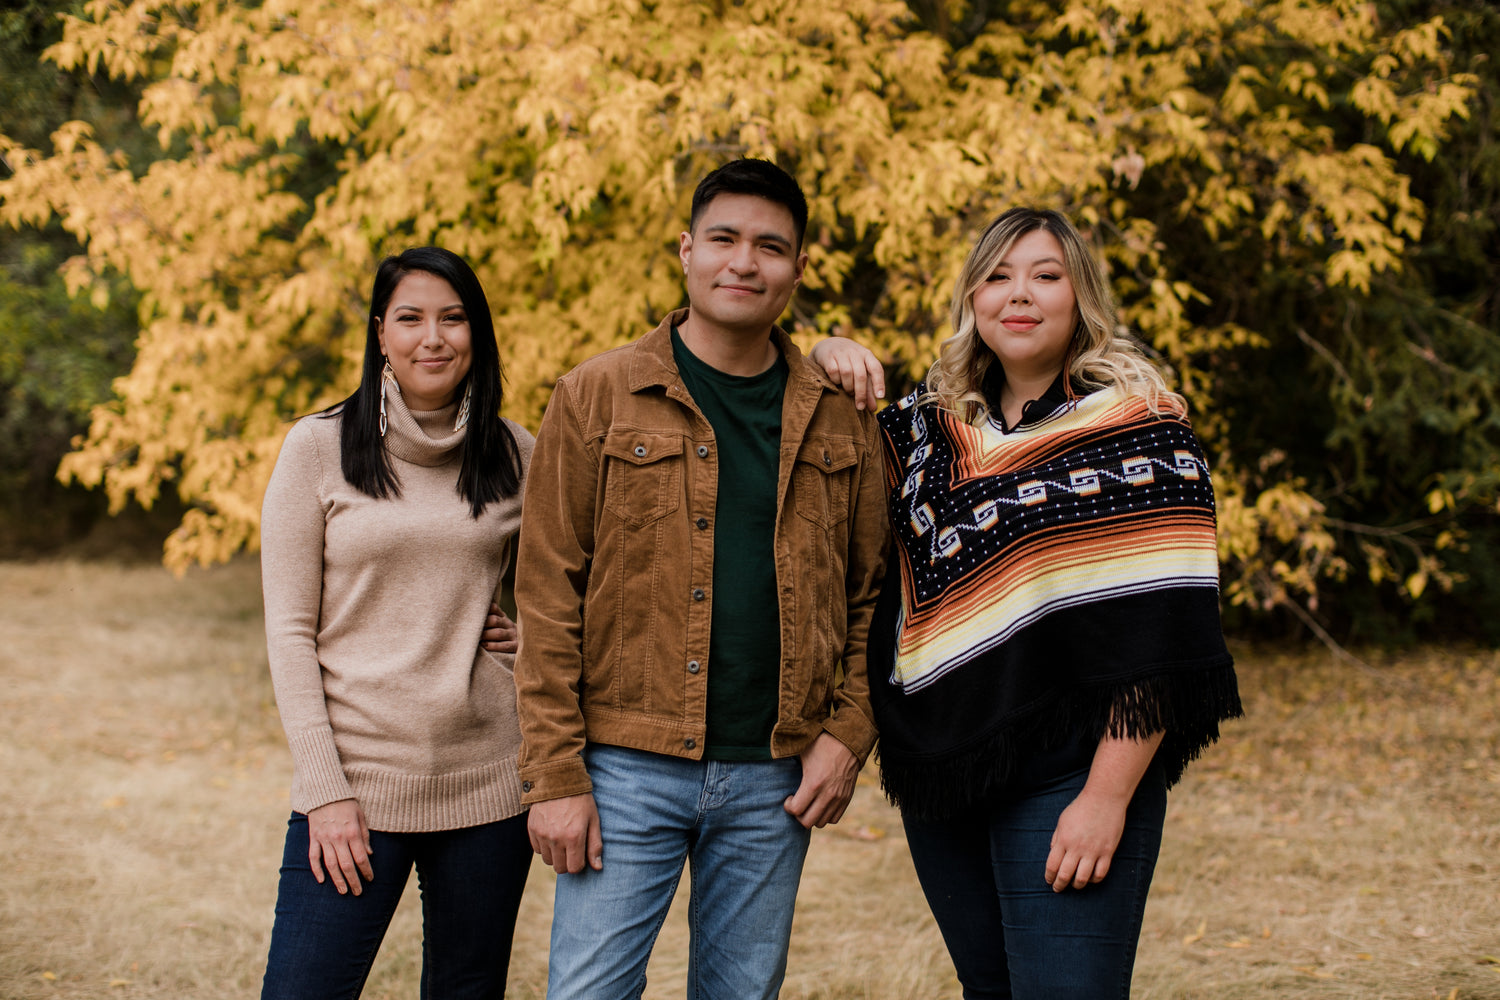 Three Indigenous people stand together in nature